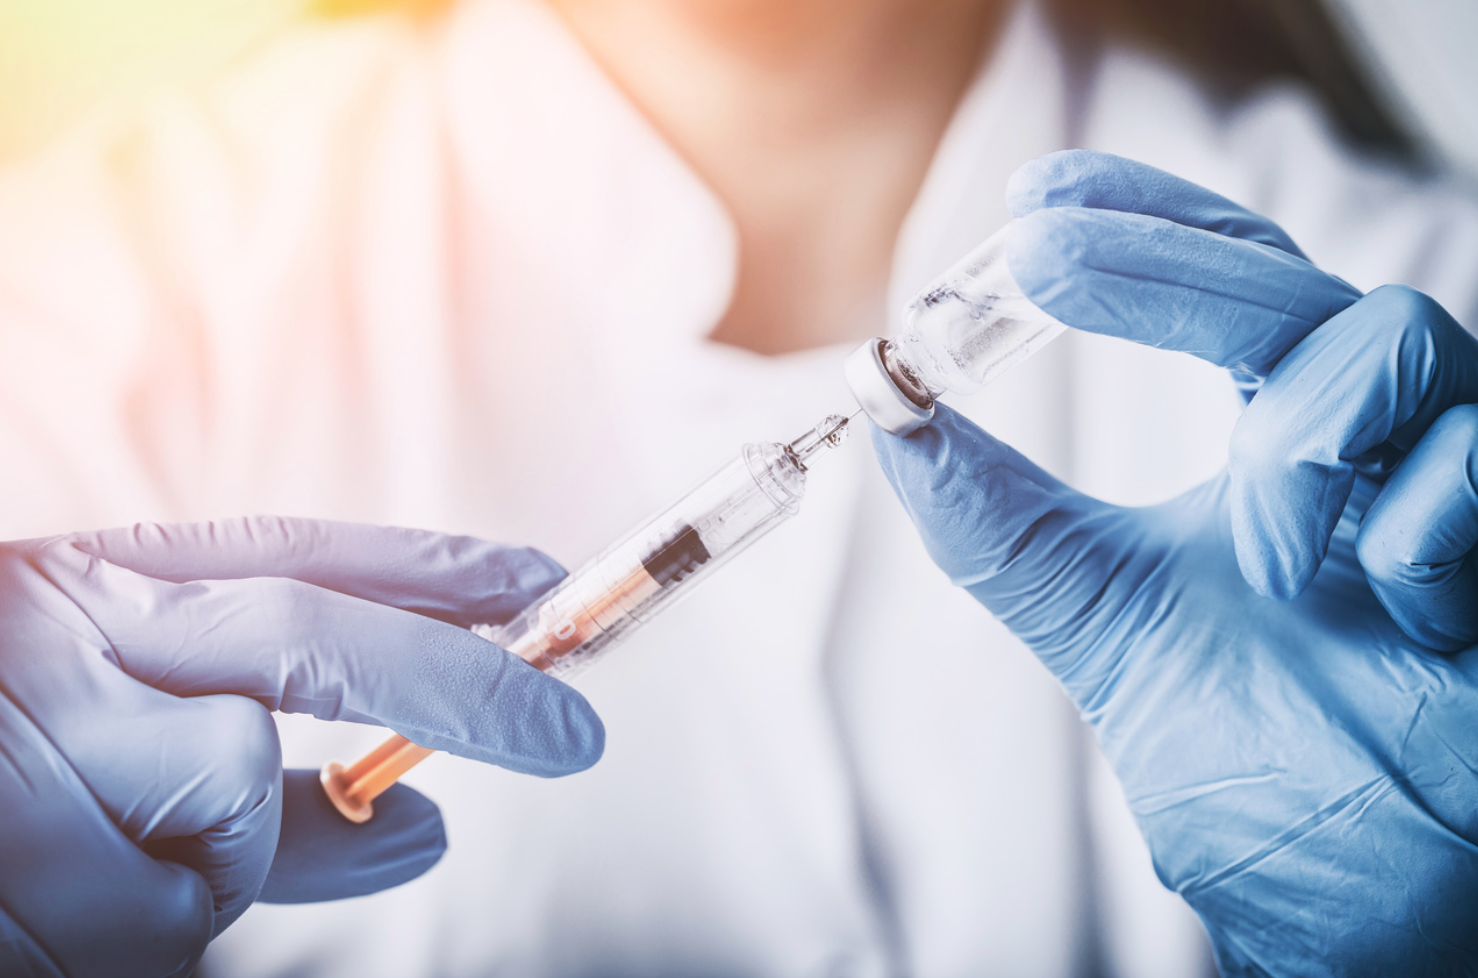 Recombinant Zoster Vaccine Cost Effective for Prevention of Shingles